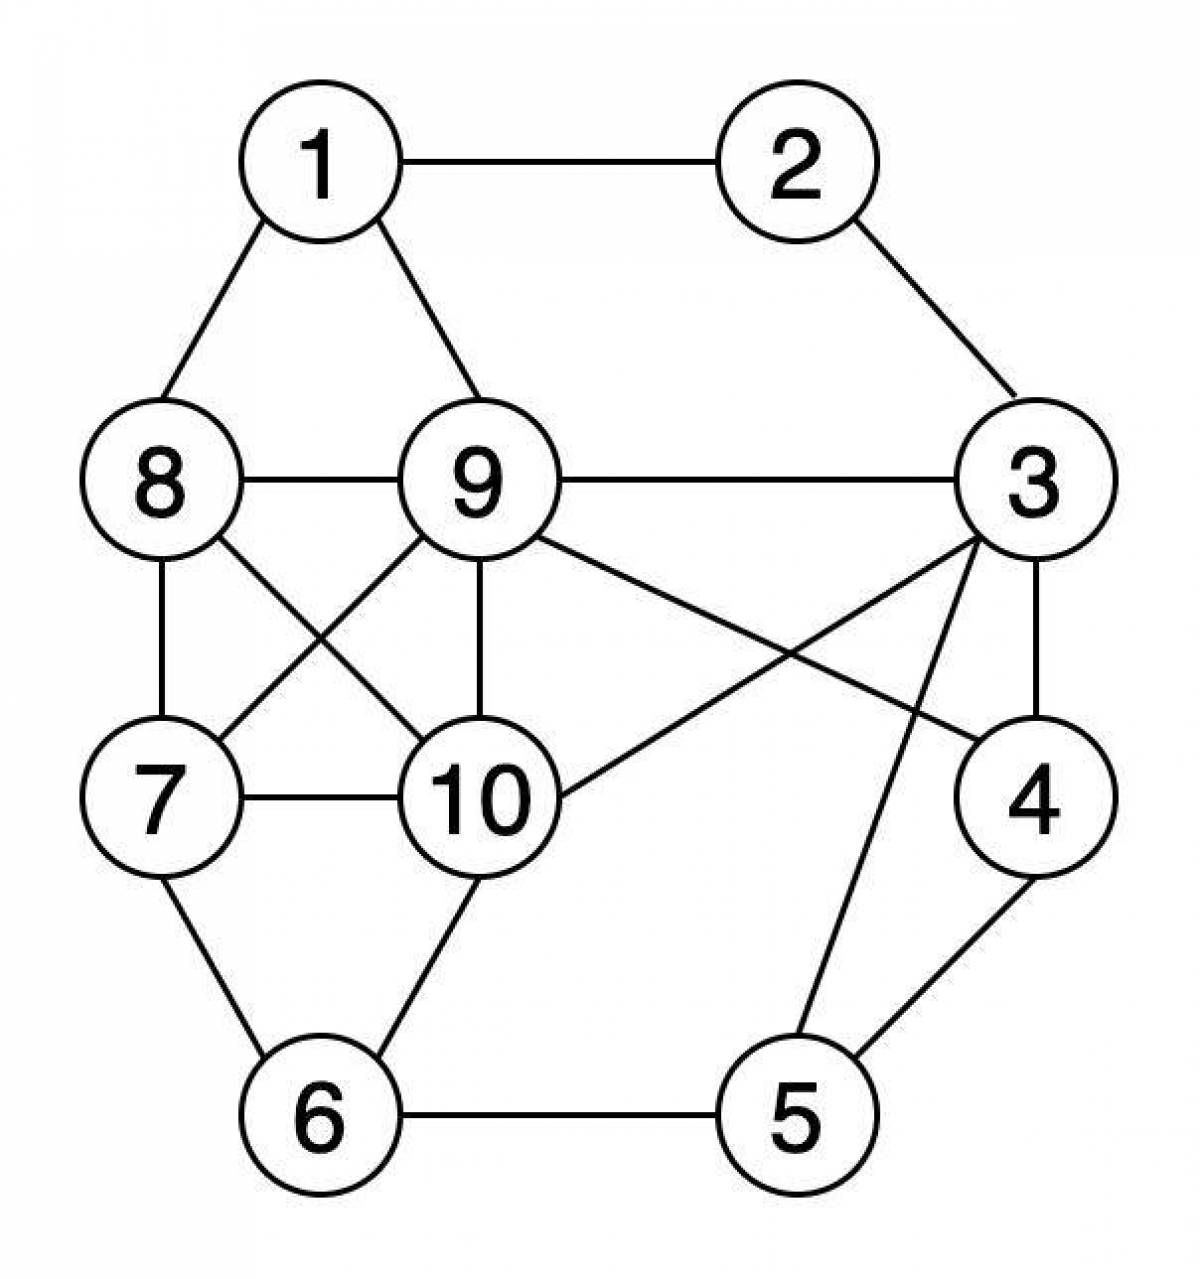 Charm of the vertices of the graph coloring